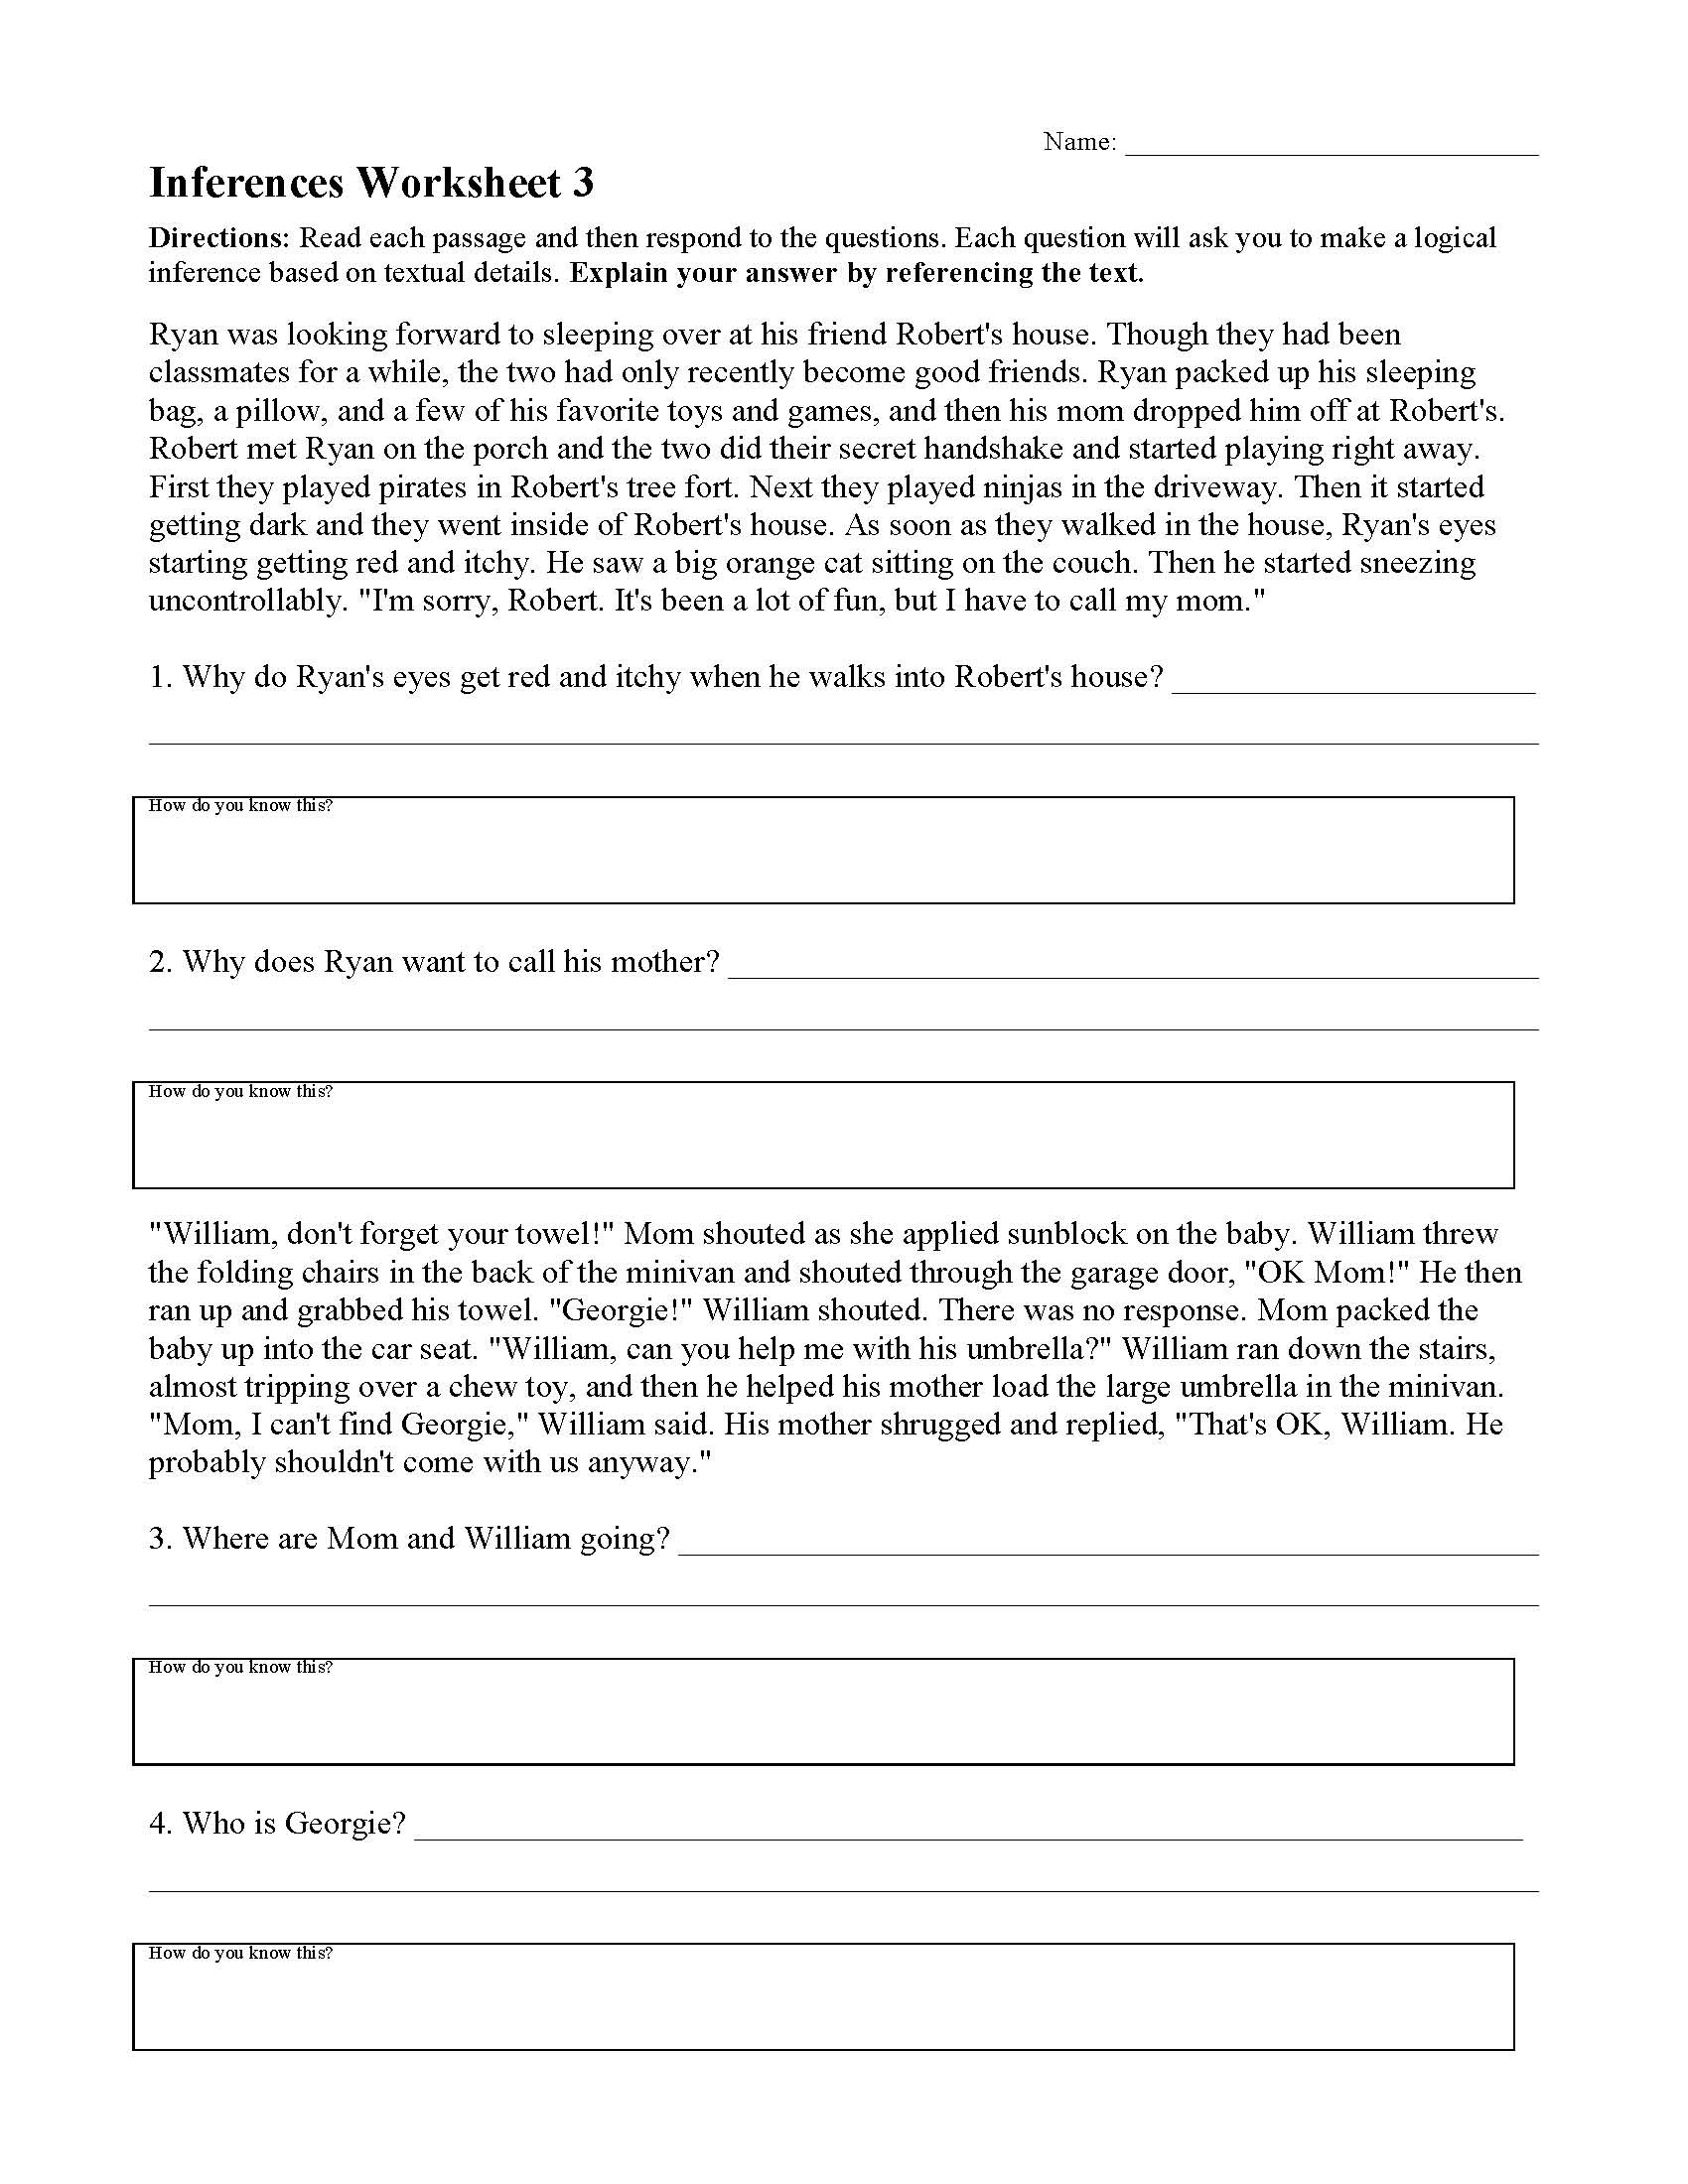 Citing Textual Evidence Worksheet Inferences Worksheets